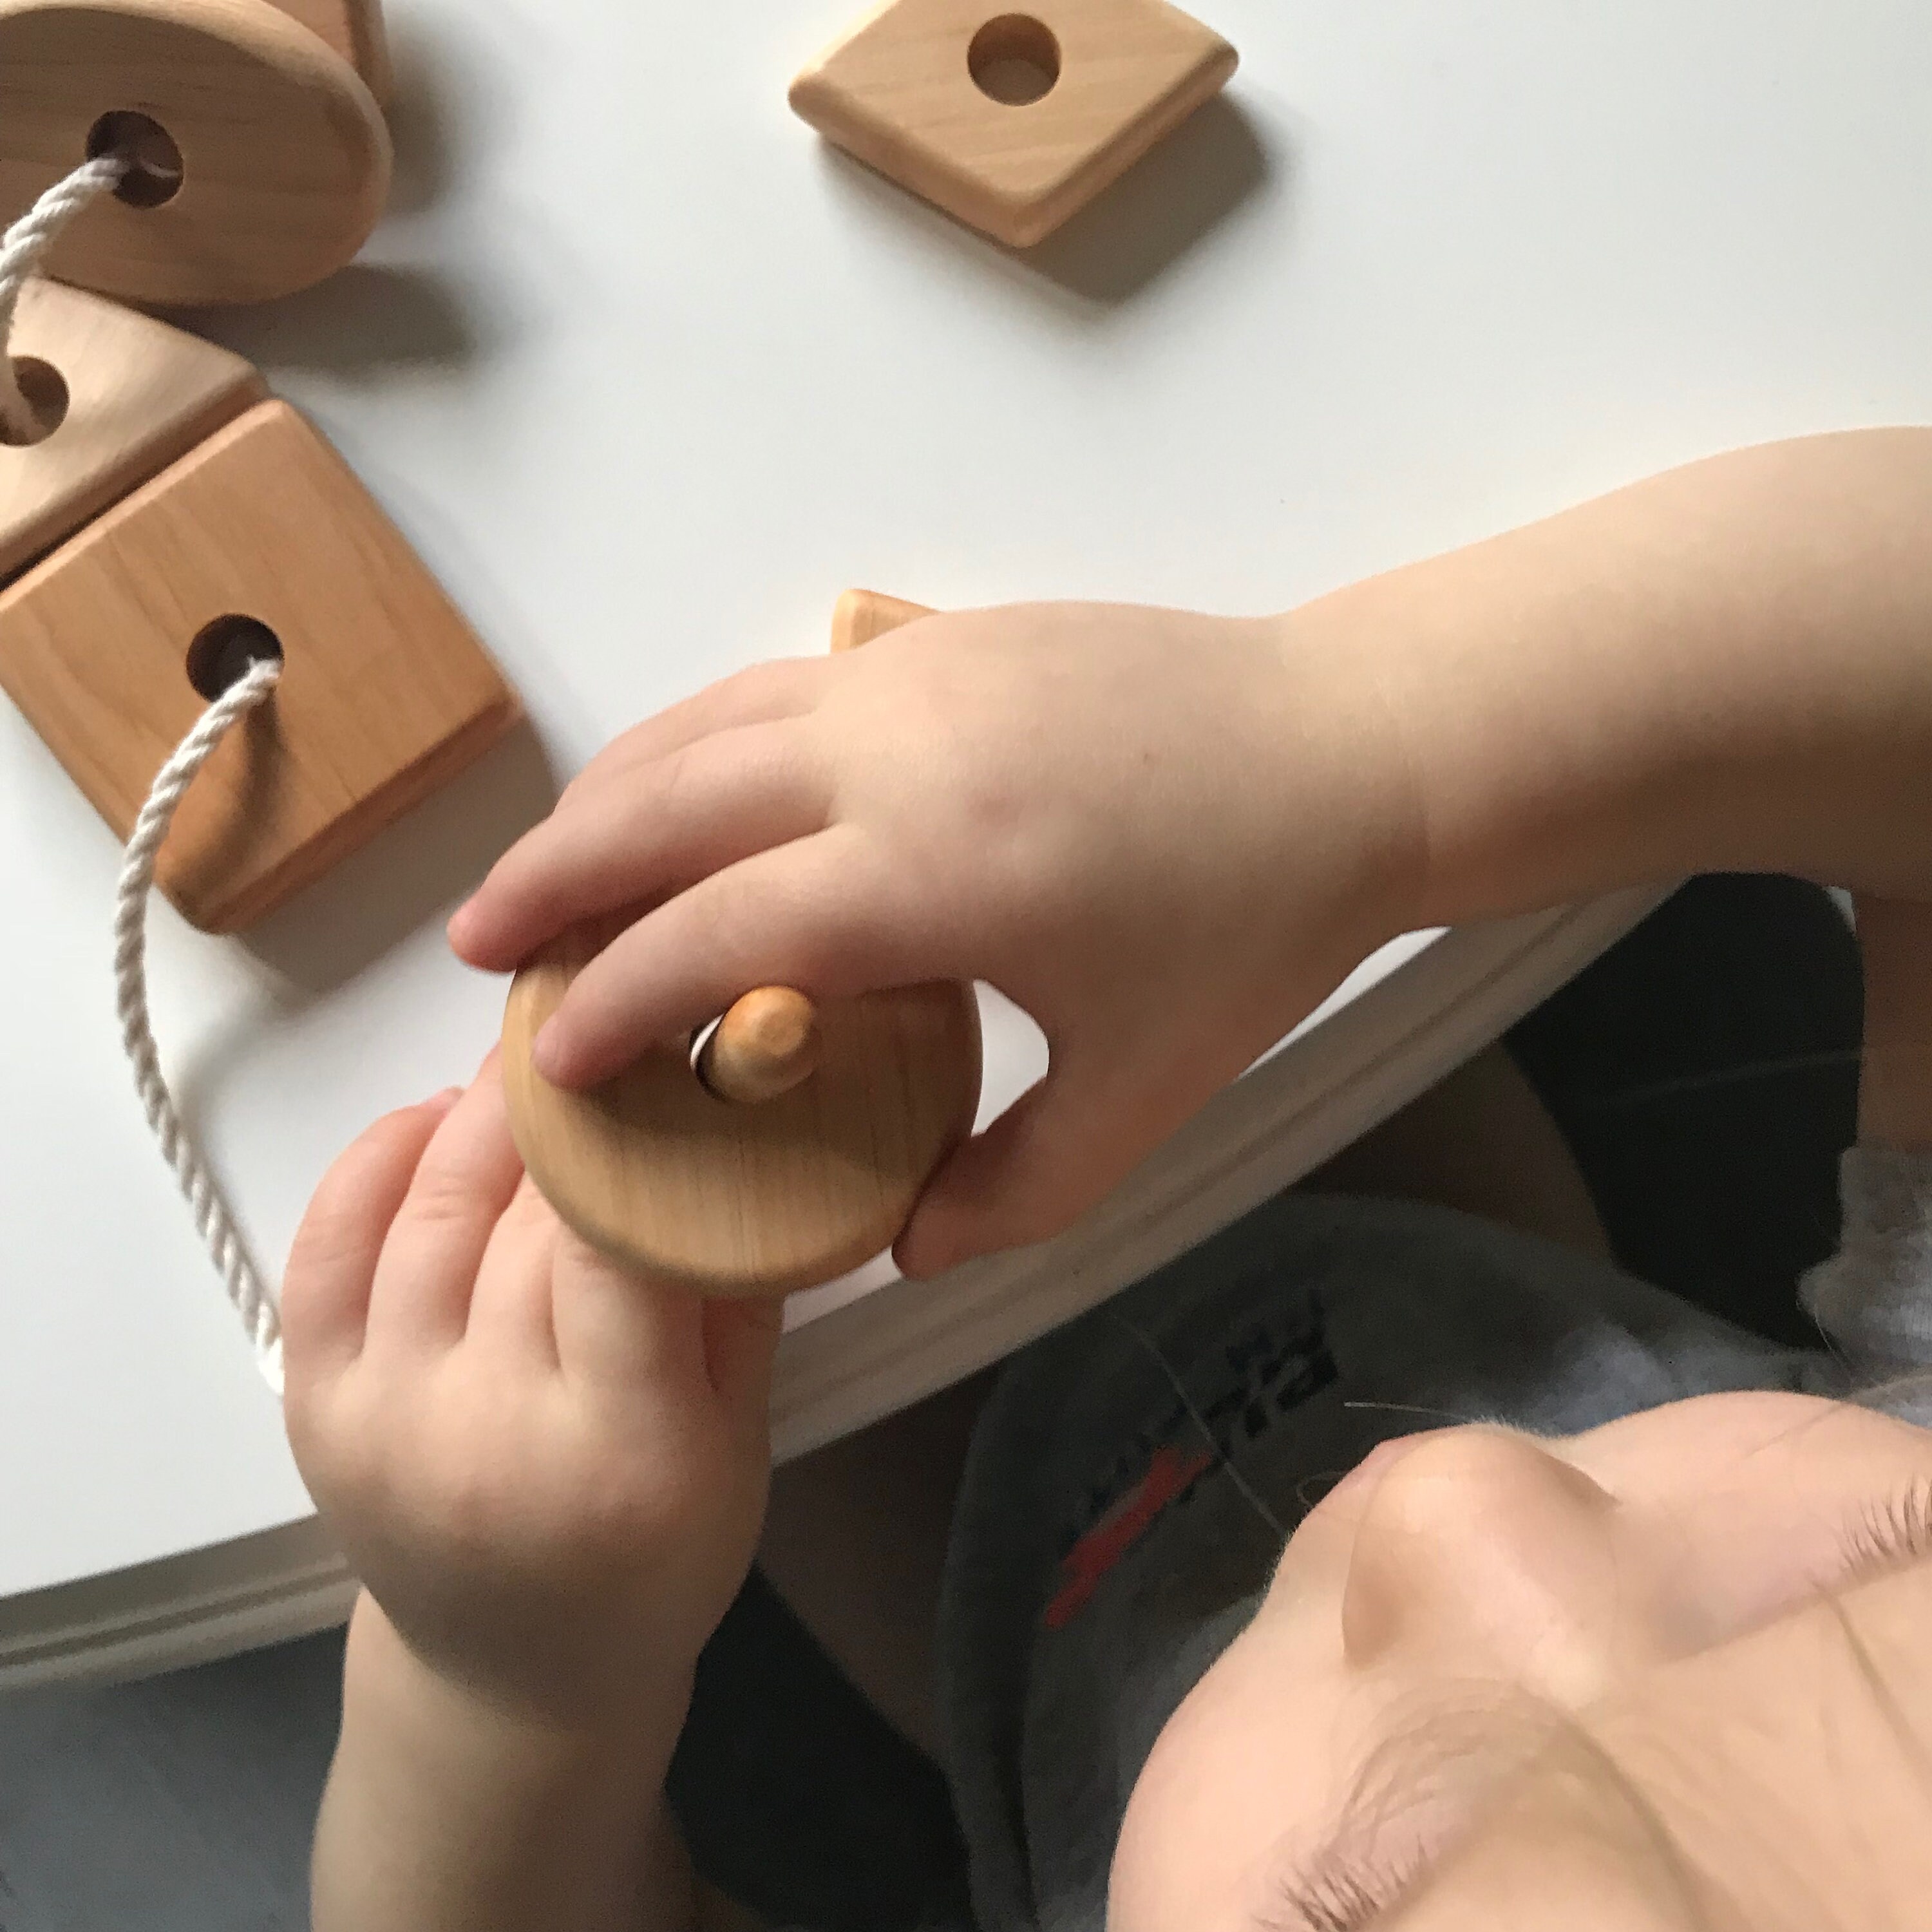 Wooden Lacing Toy With Geometry Shapes for Toddler Wood Lacing Beads Toy 3  Year Old Kid Gift Made in Ukraine -  Denmark